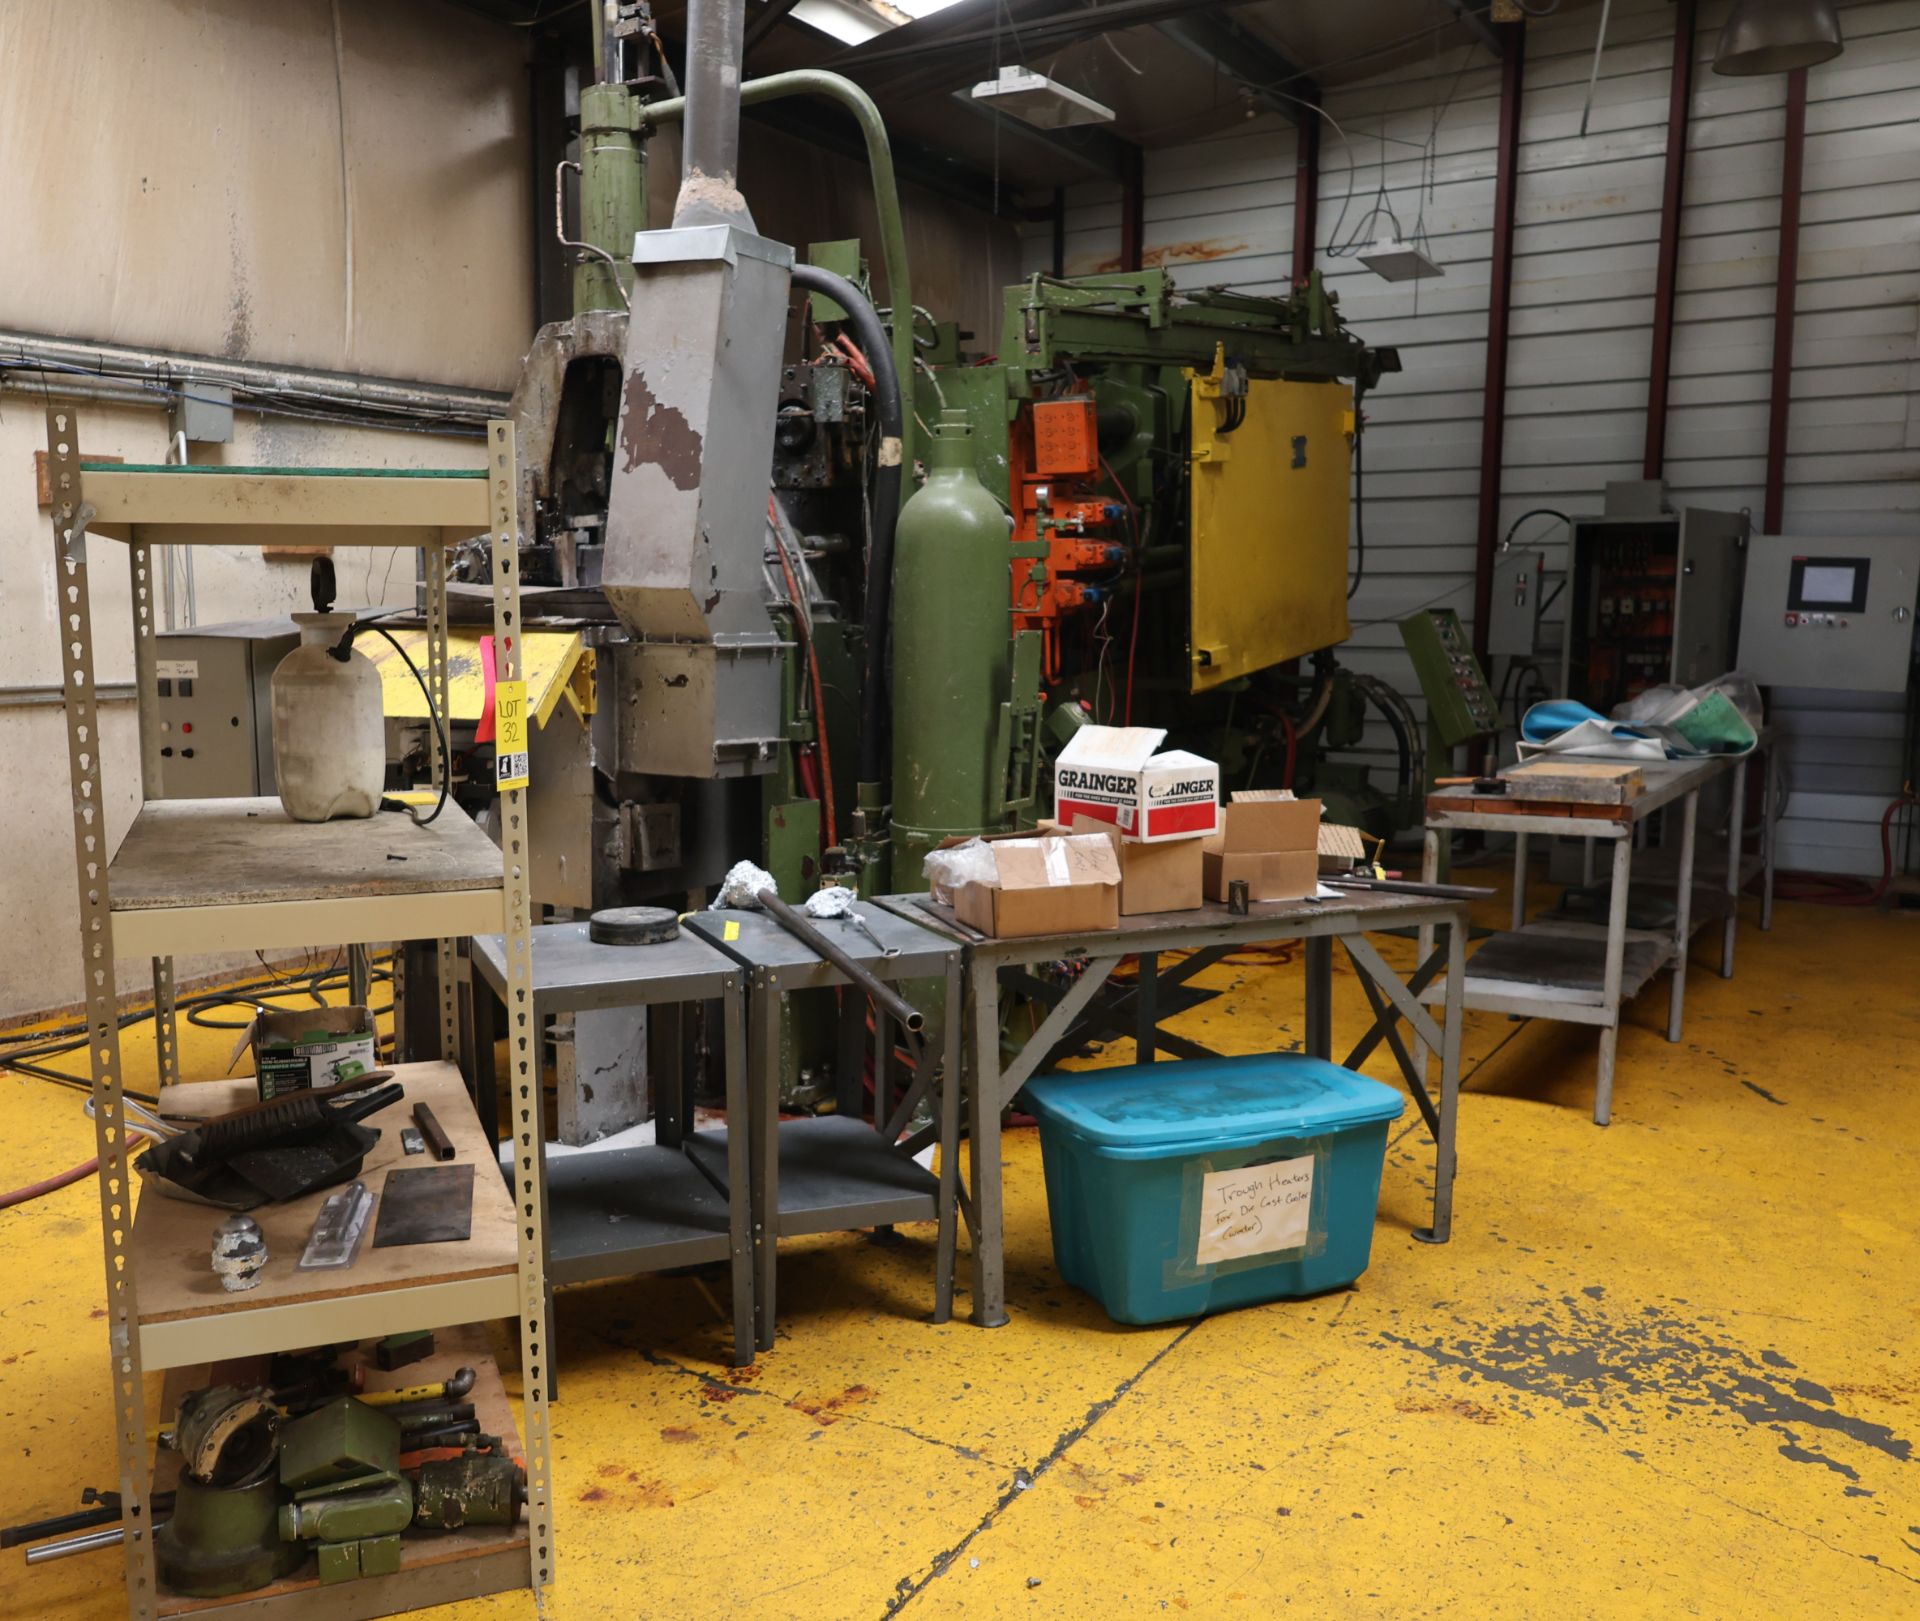 Die Casting Machine, Shelves, Tables and Contents - Image 2 of 25